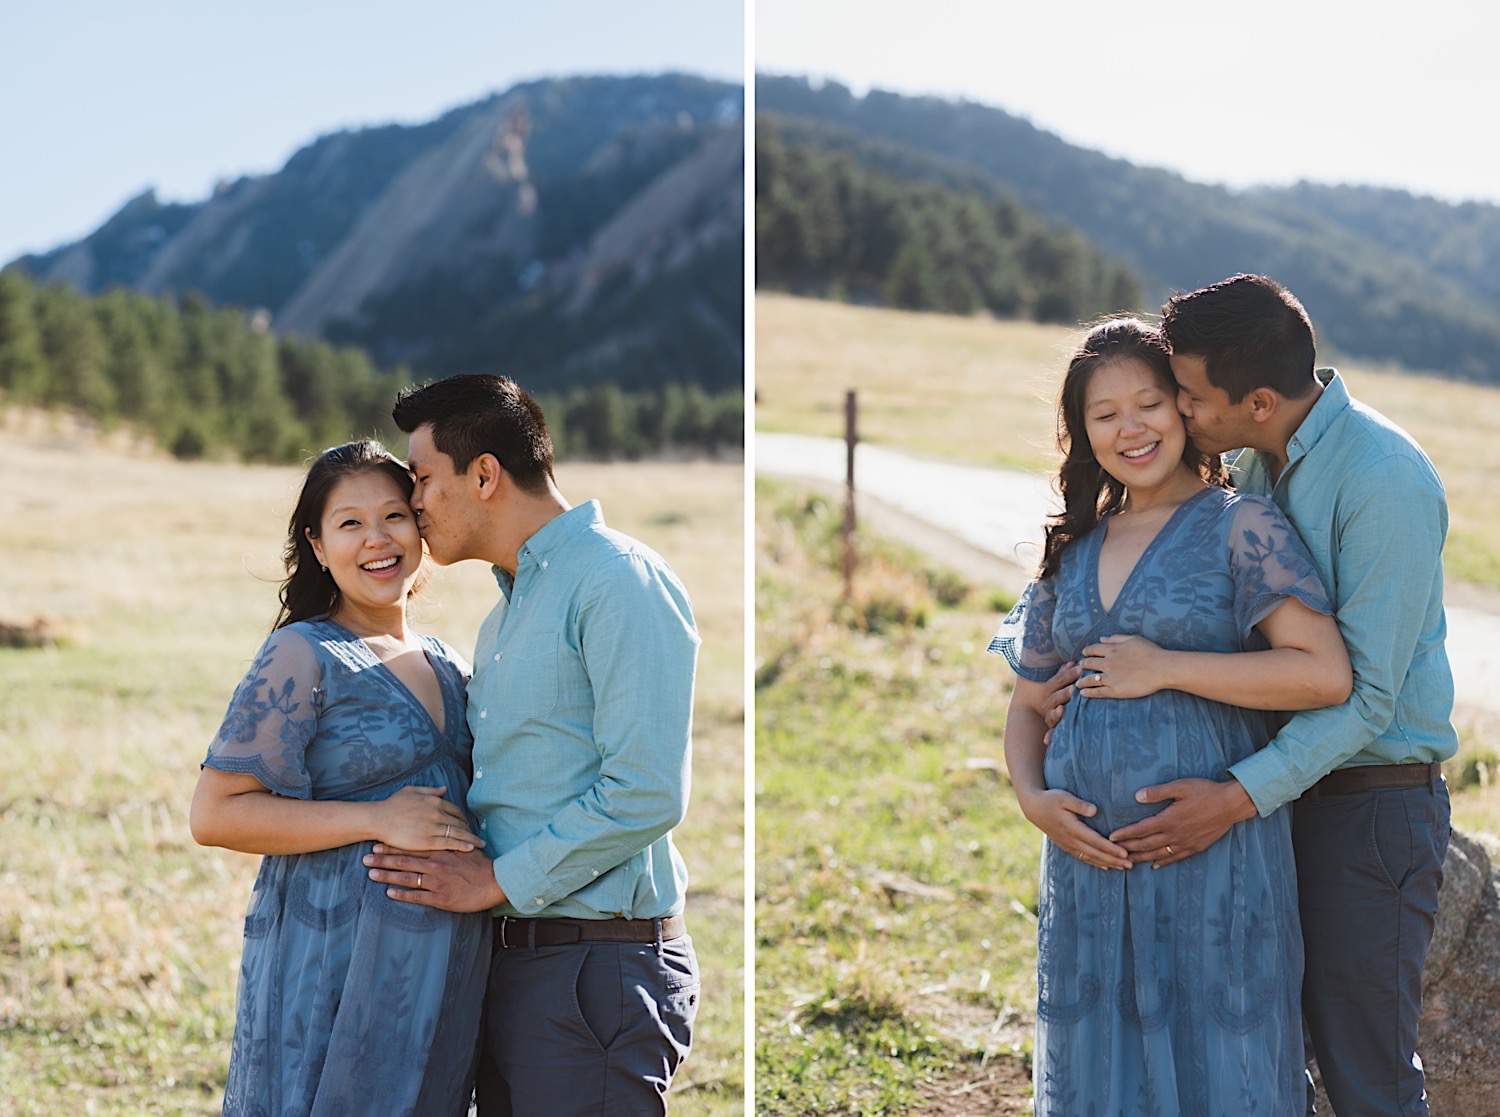 Boulder Colorado maternity photographer chautauqua park golden hour mountain session Gather and Abide Photography blue dress flowers baby's breathe asian american mom and dad firstborn